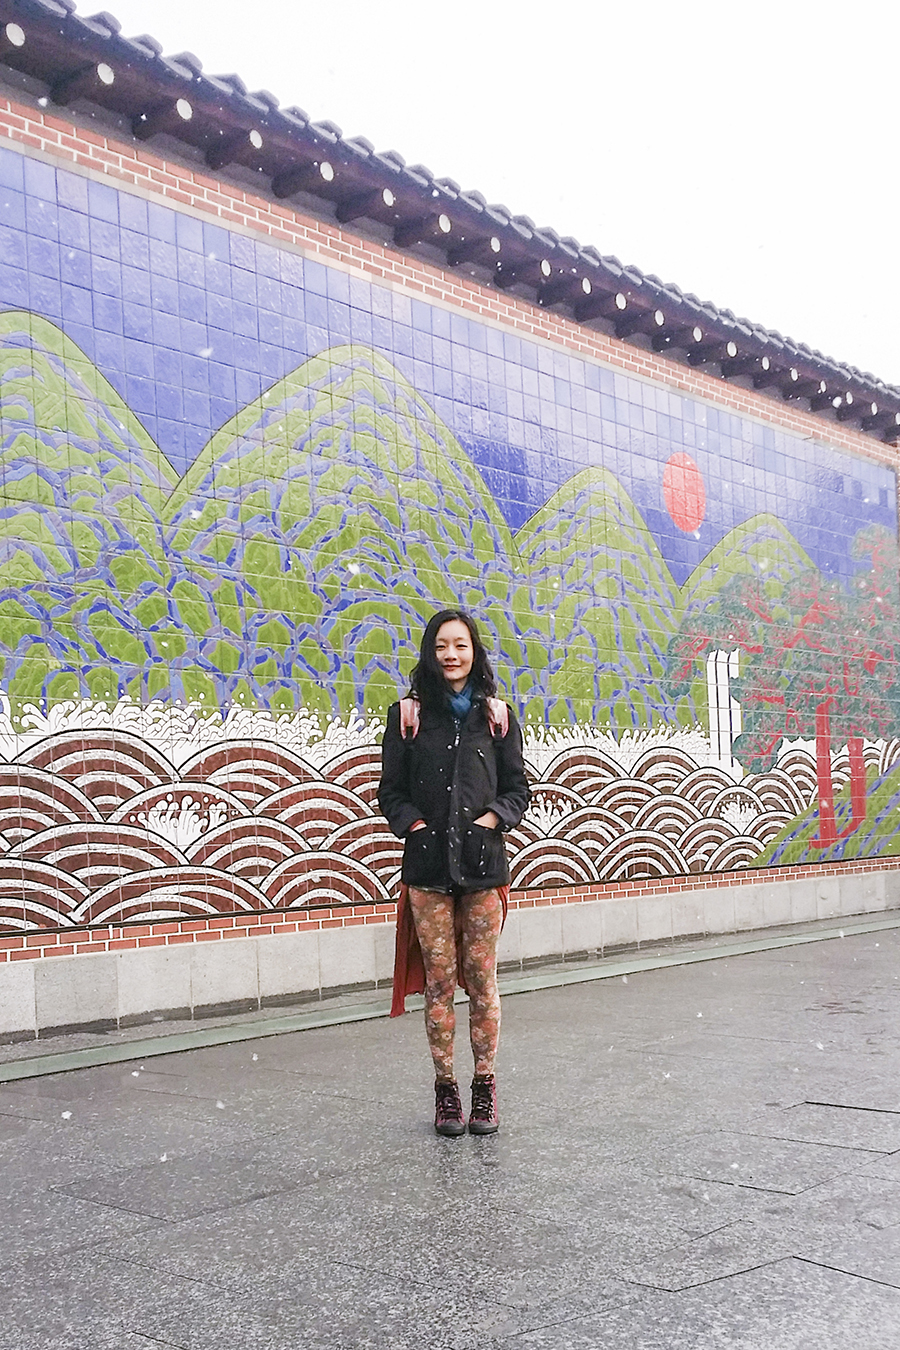 Outfit photo against a tiled wall of a landscape mosaic in Seoul, South Korea.